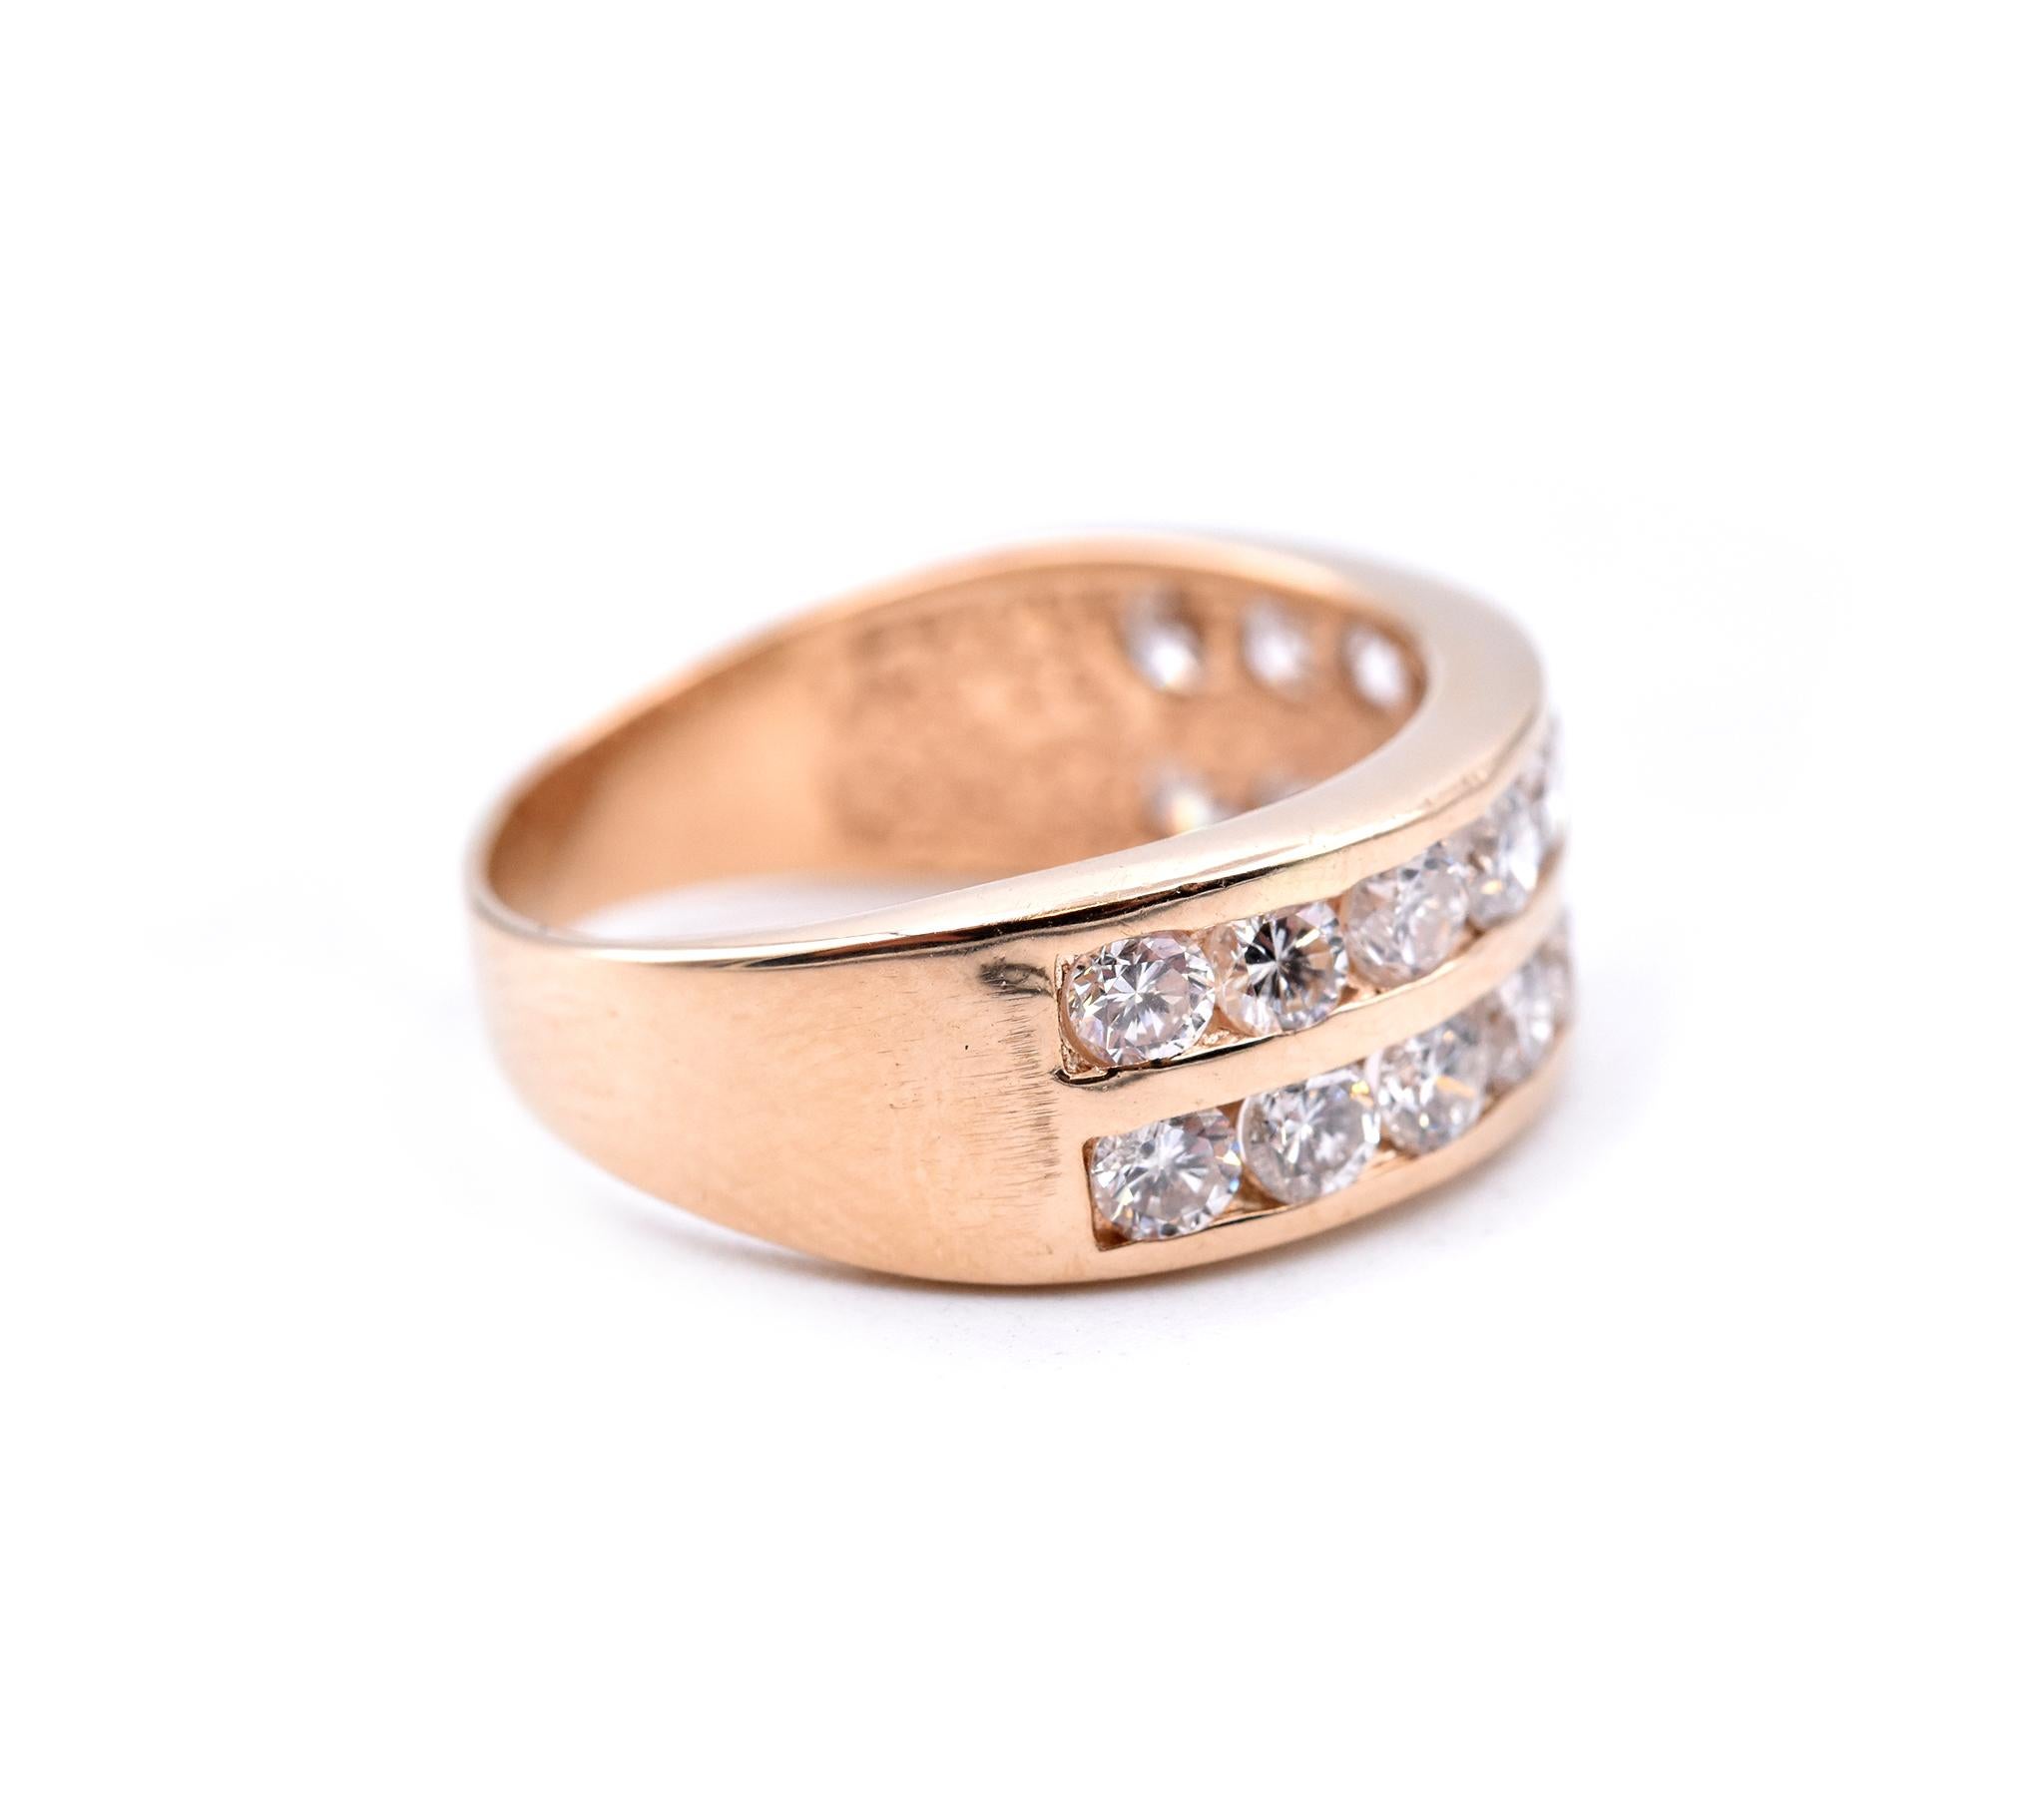 Designer: custom
Material: 14k yellow gold
Diamonds: 20 round brilliant cuts = 1.20cttw
Color: H
Clarity: SI1
Size: 6.5 (please allow two additional shipping days for sizing requests)  
Dimensions: ring measures 7.2mm in width
Weight: 4.46 grams
